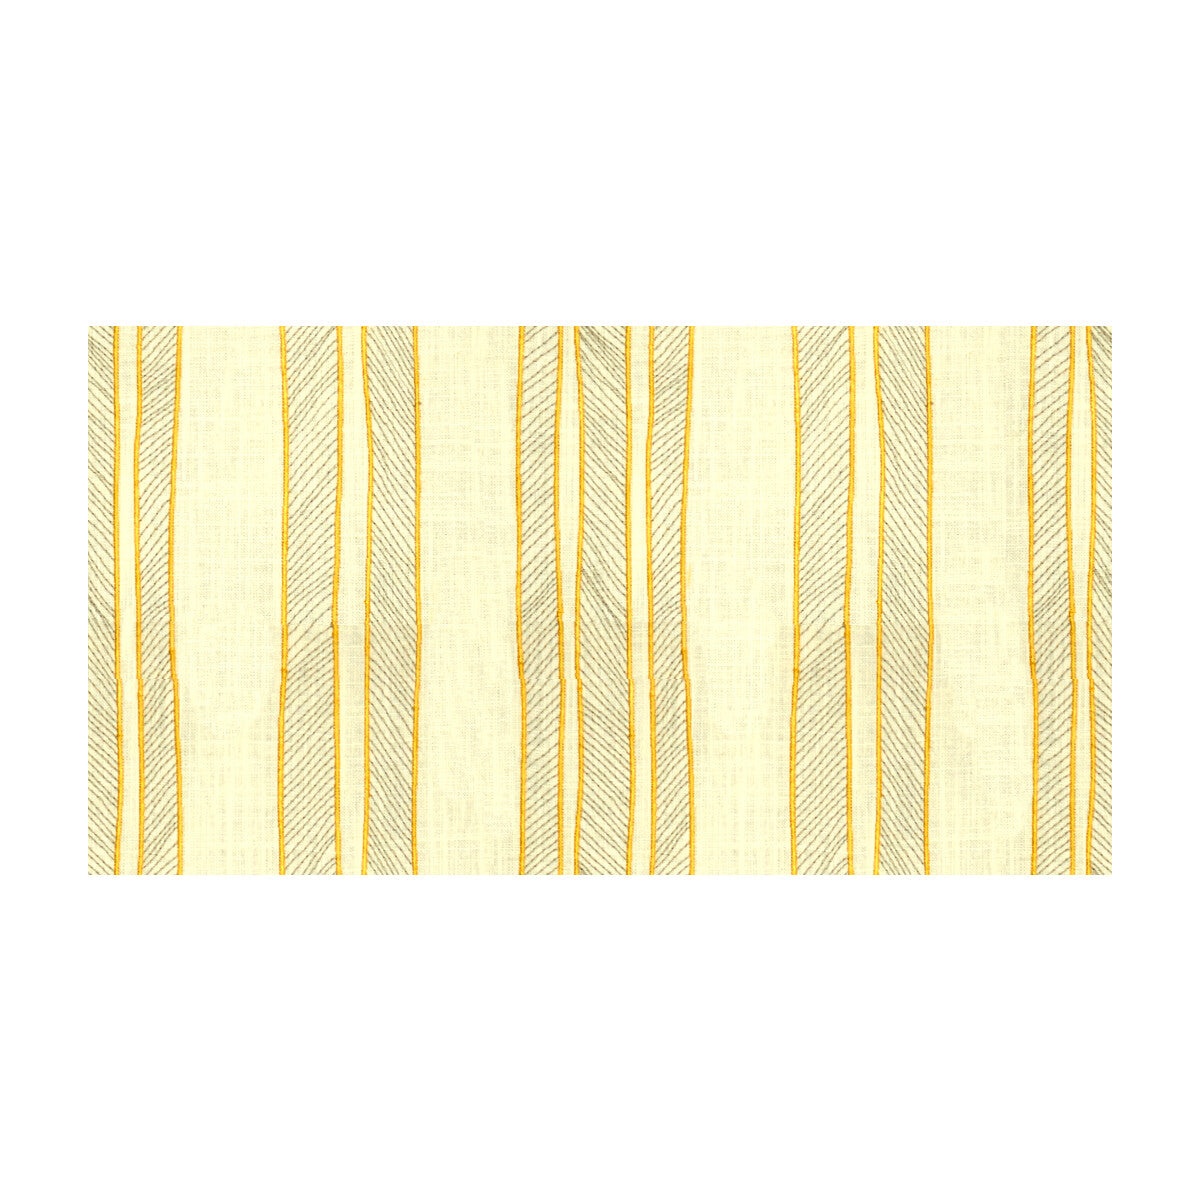 Cords fabric in sunny color - pattern 33430.411.0 - by Kravet Basics in the Jeffrey Alan Marks Waterside collection